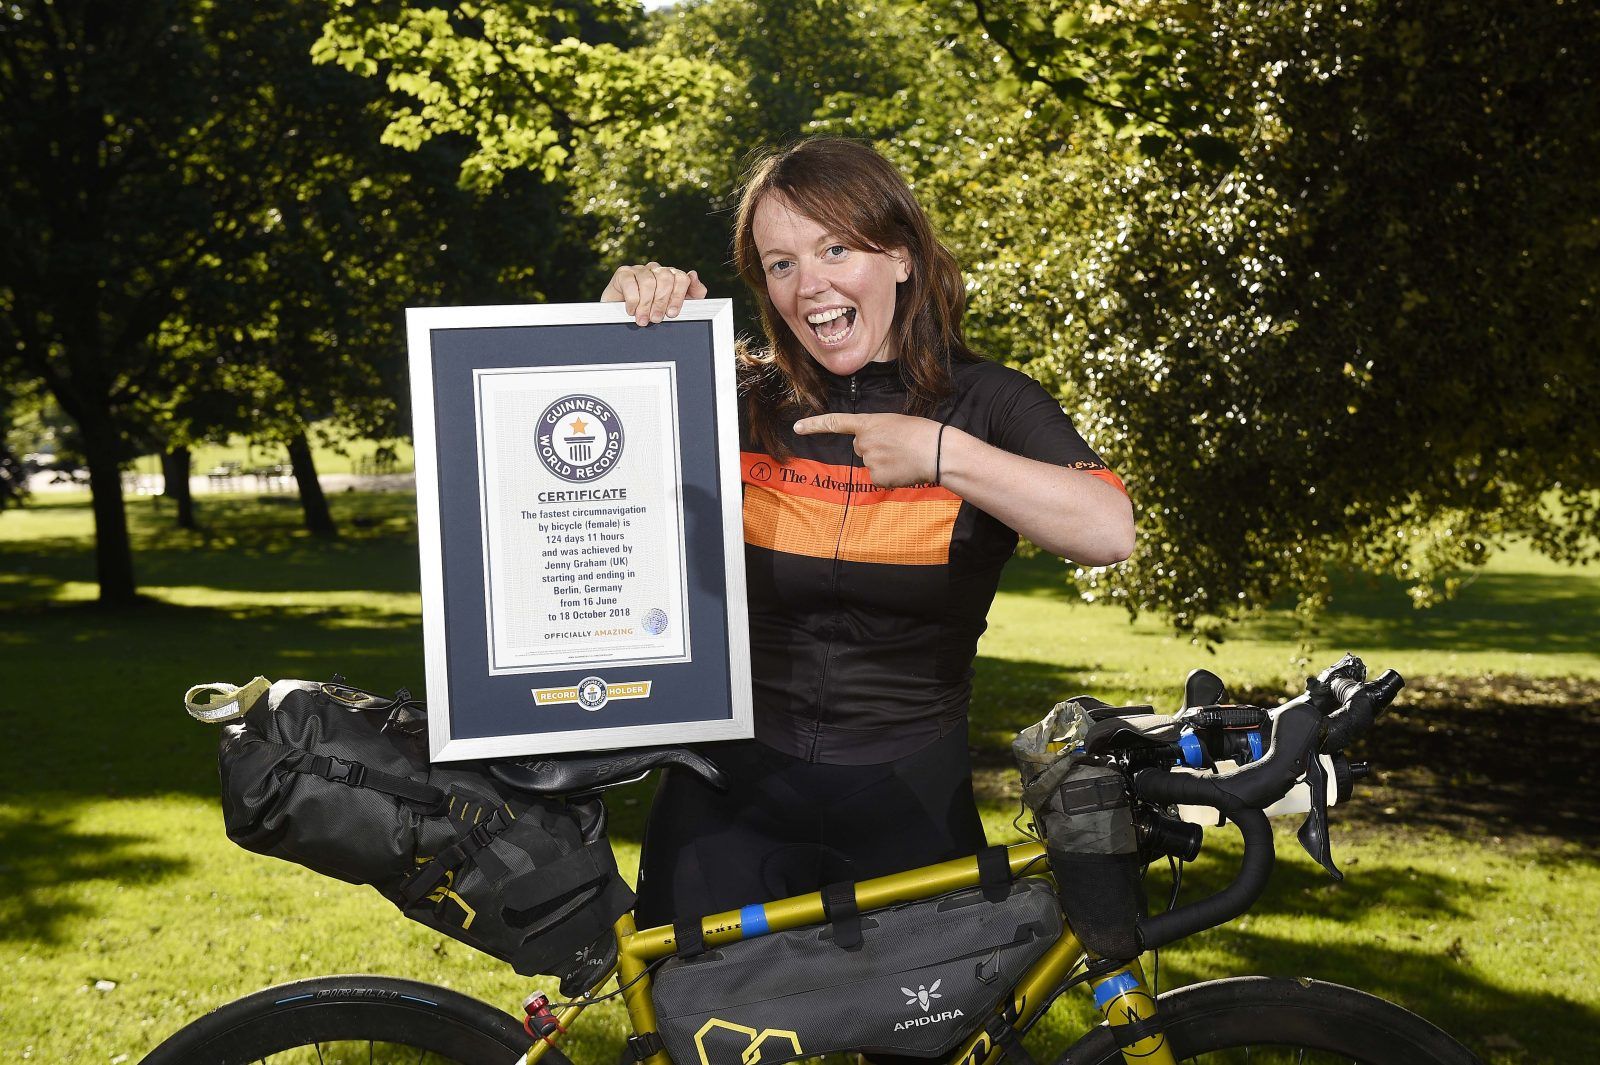 Jenny Graham achieves Guinness World Record’s title for the fastest circumnavigation by bicycle. Photo: Greg Macvean